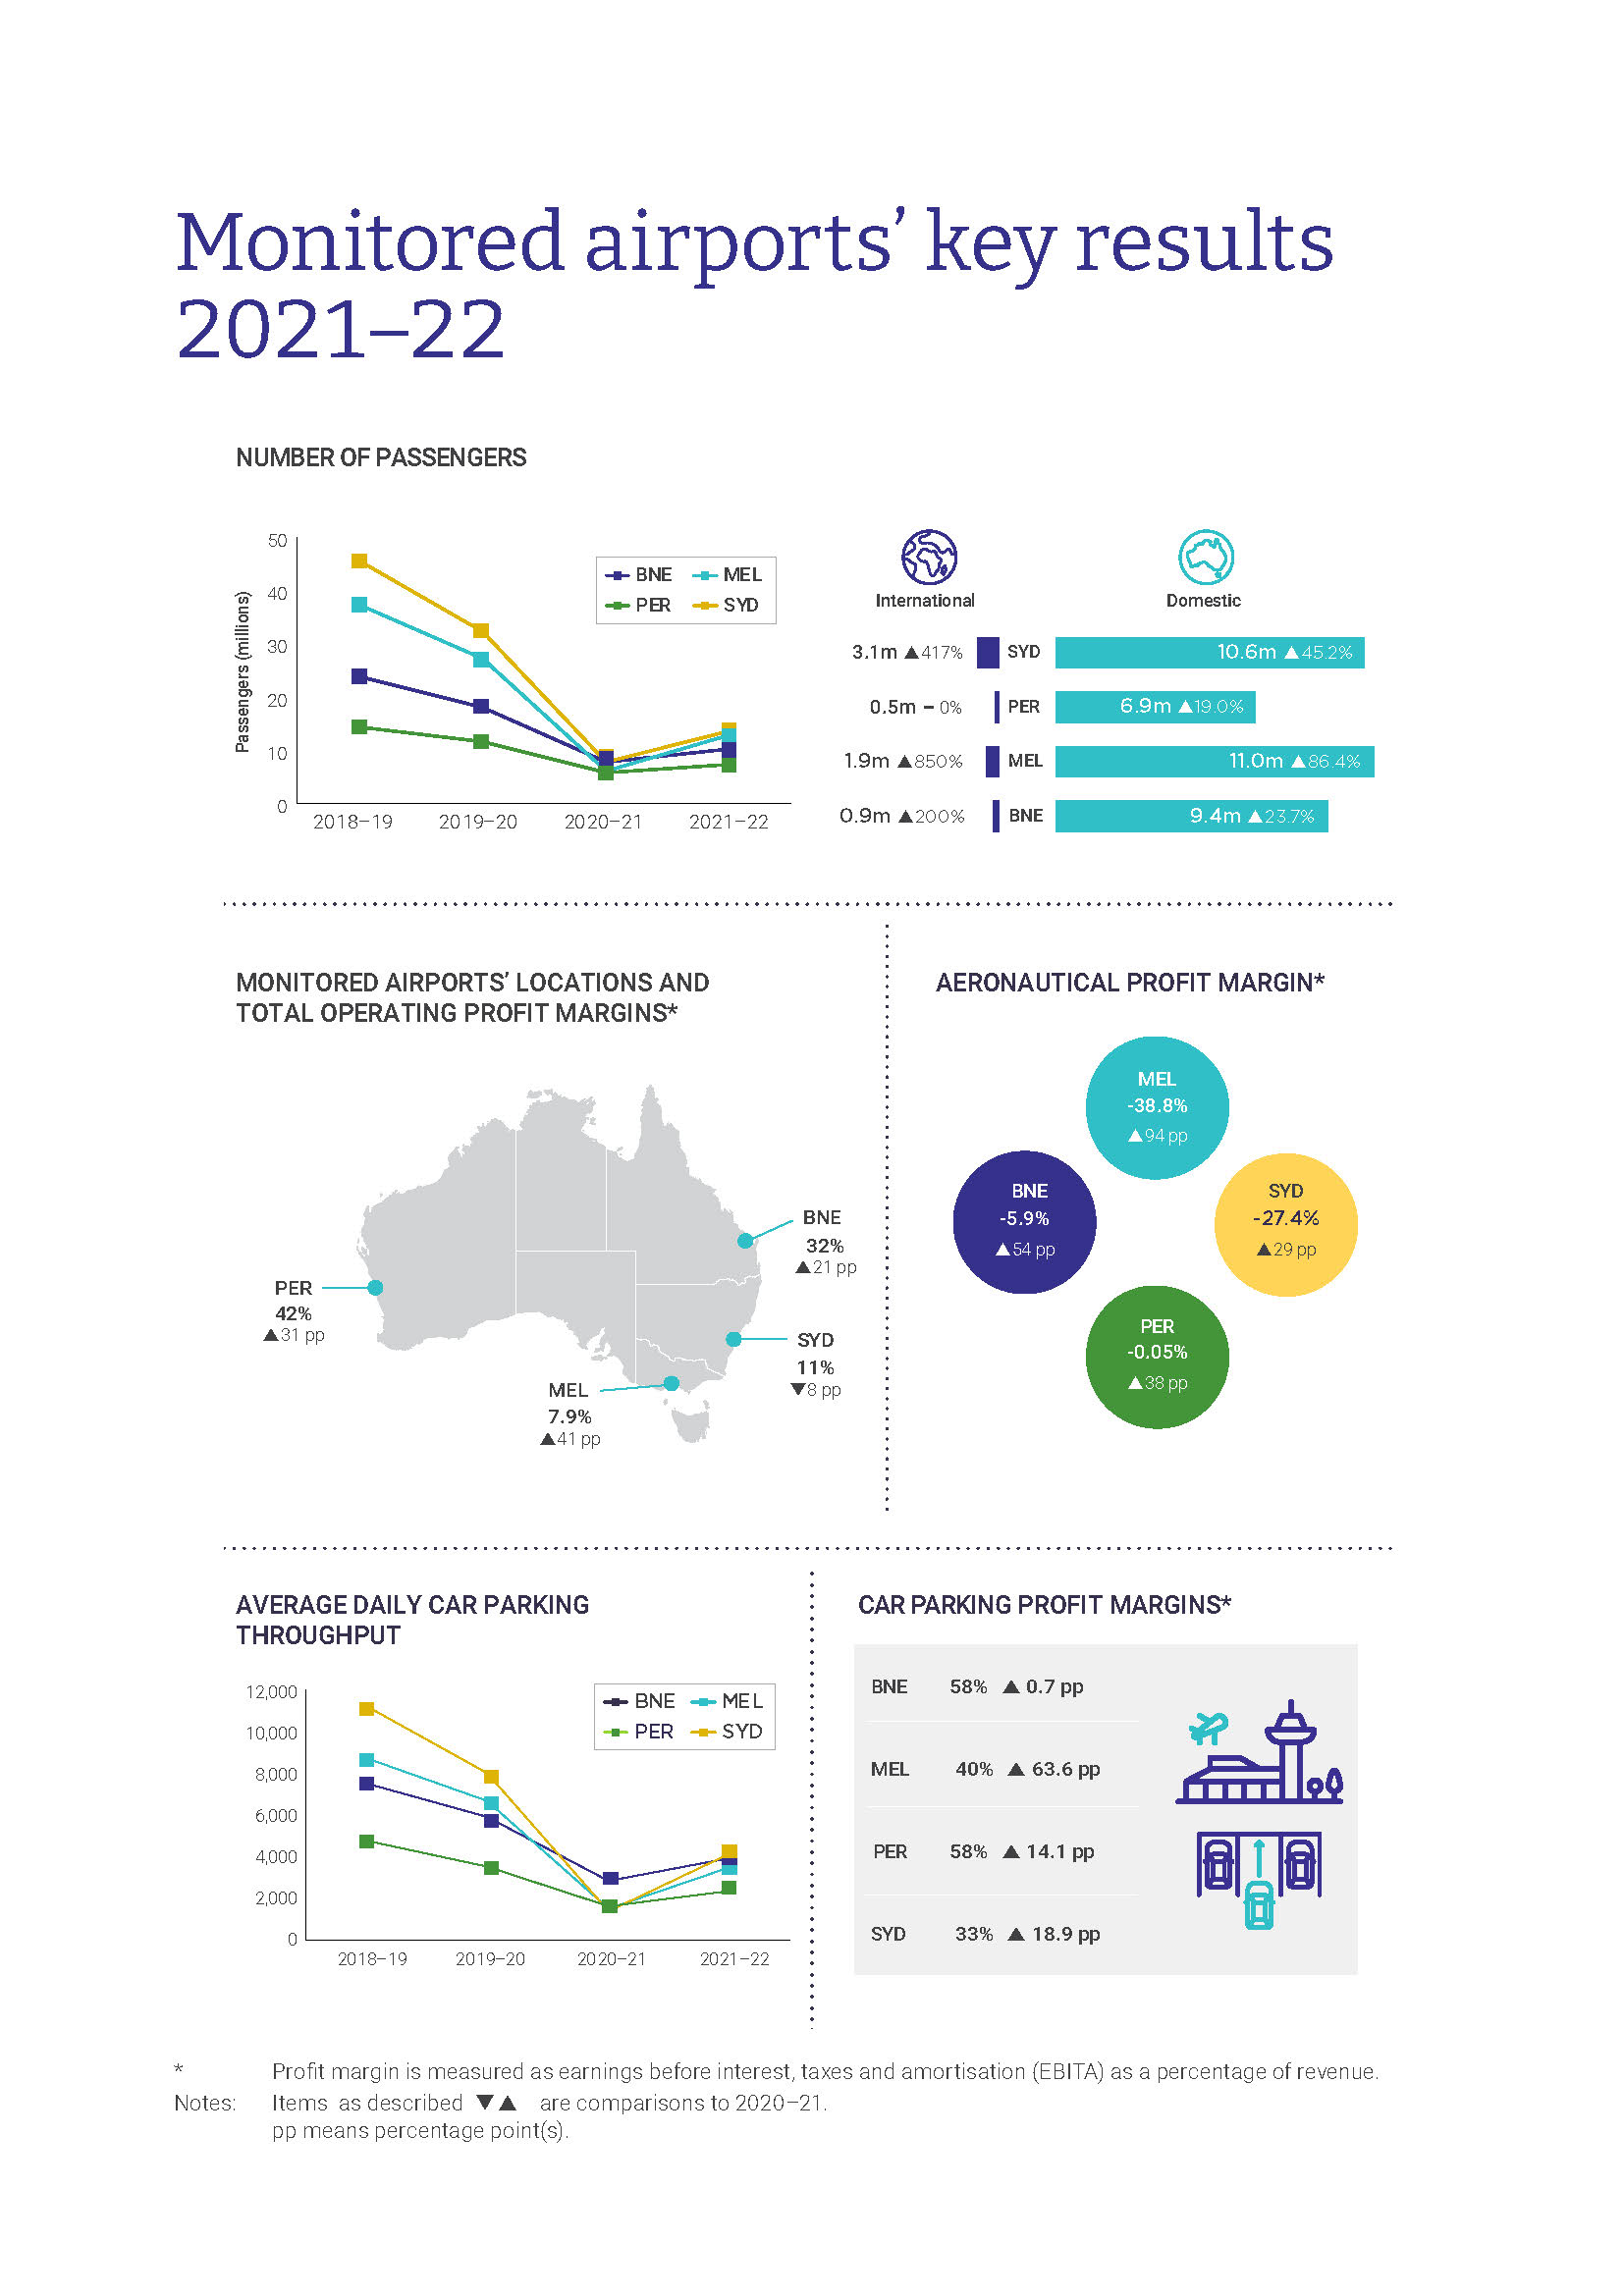 Infographic titled 'Monitored airports' key results 2021-22'. 1st section shows annual passenger numbers over 4 years at Brisbane, Melbourne, Perth and Sydney airports, all trending upwards since a low in 2020-21. 2nd section shows operating profit margins and aeronautical profit margins for the same airports, with all but Sydney's total operating profit margins trending upwards. The final section shows average daily car parking throughput and car parking profit margins for the airports, all trending up.